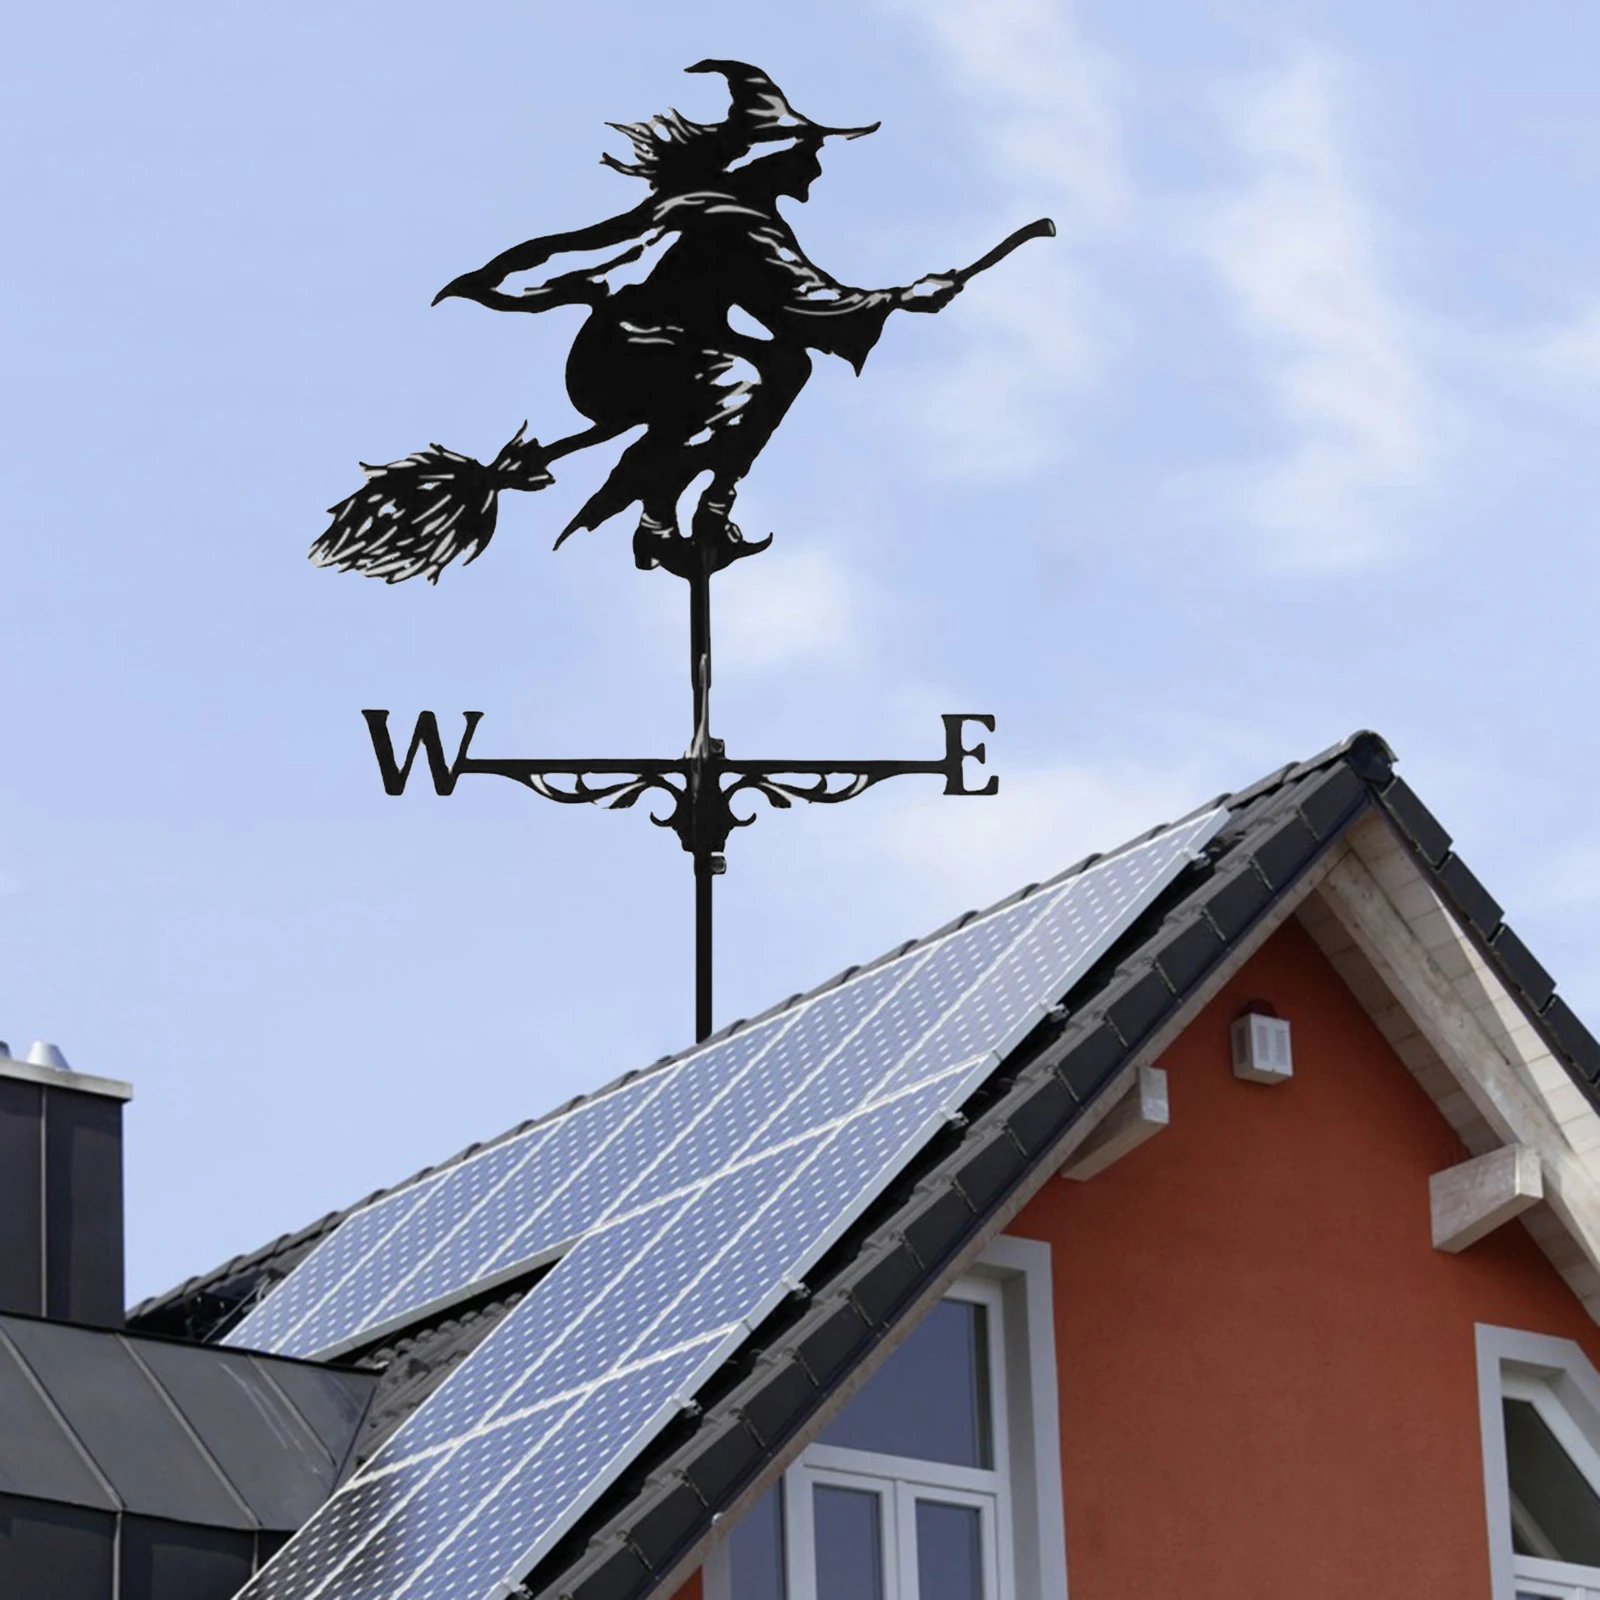 Weathervane with Witch Statue Ornament Farm Scene Home Roof Decor Crafts